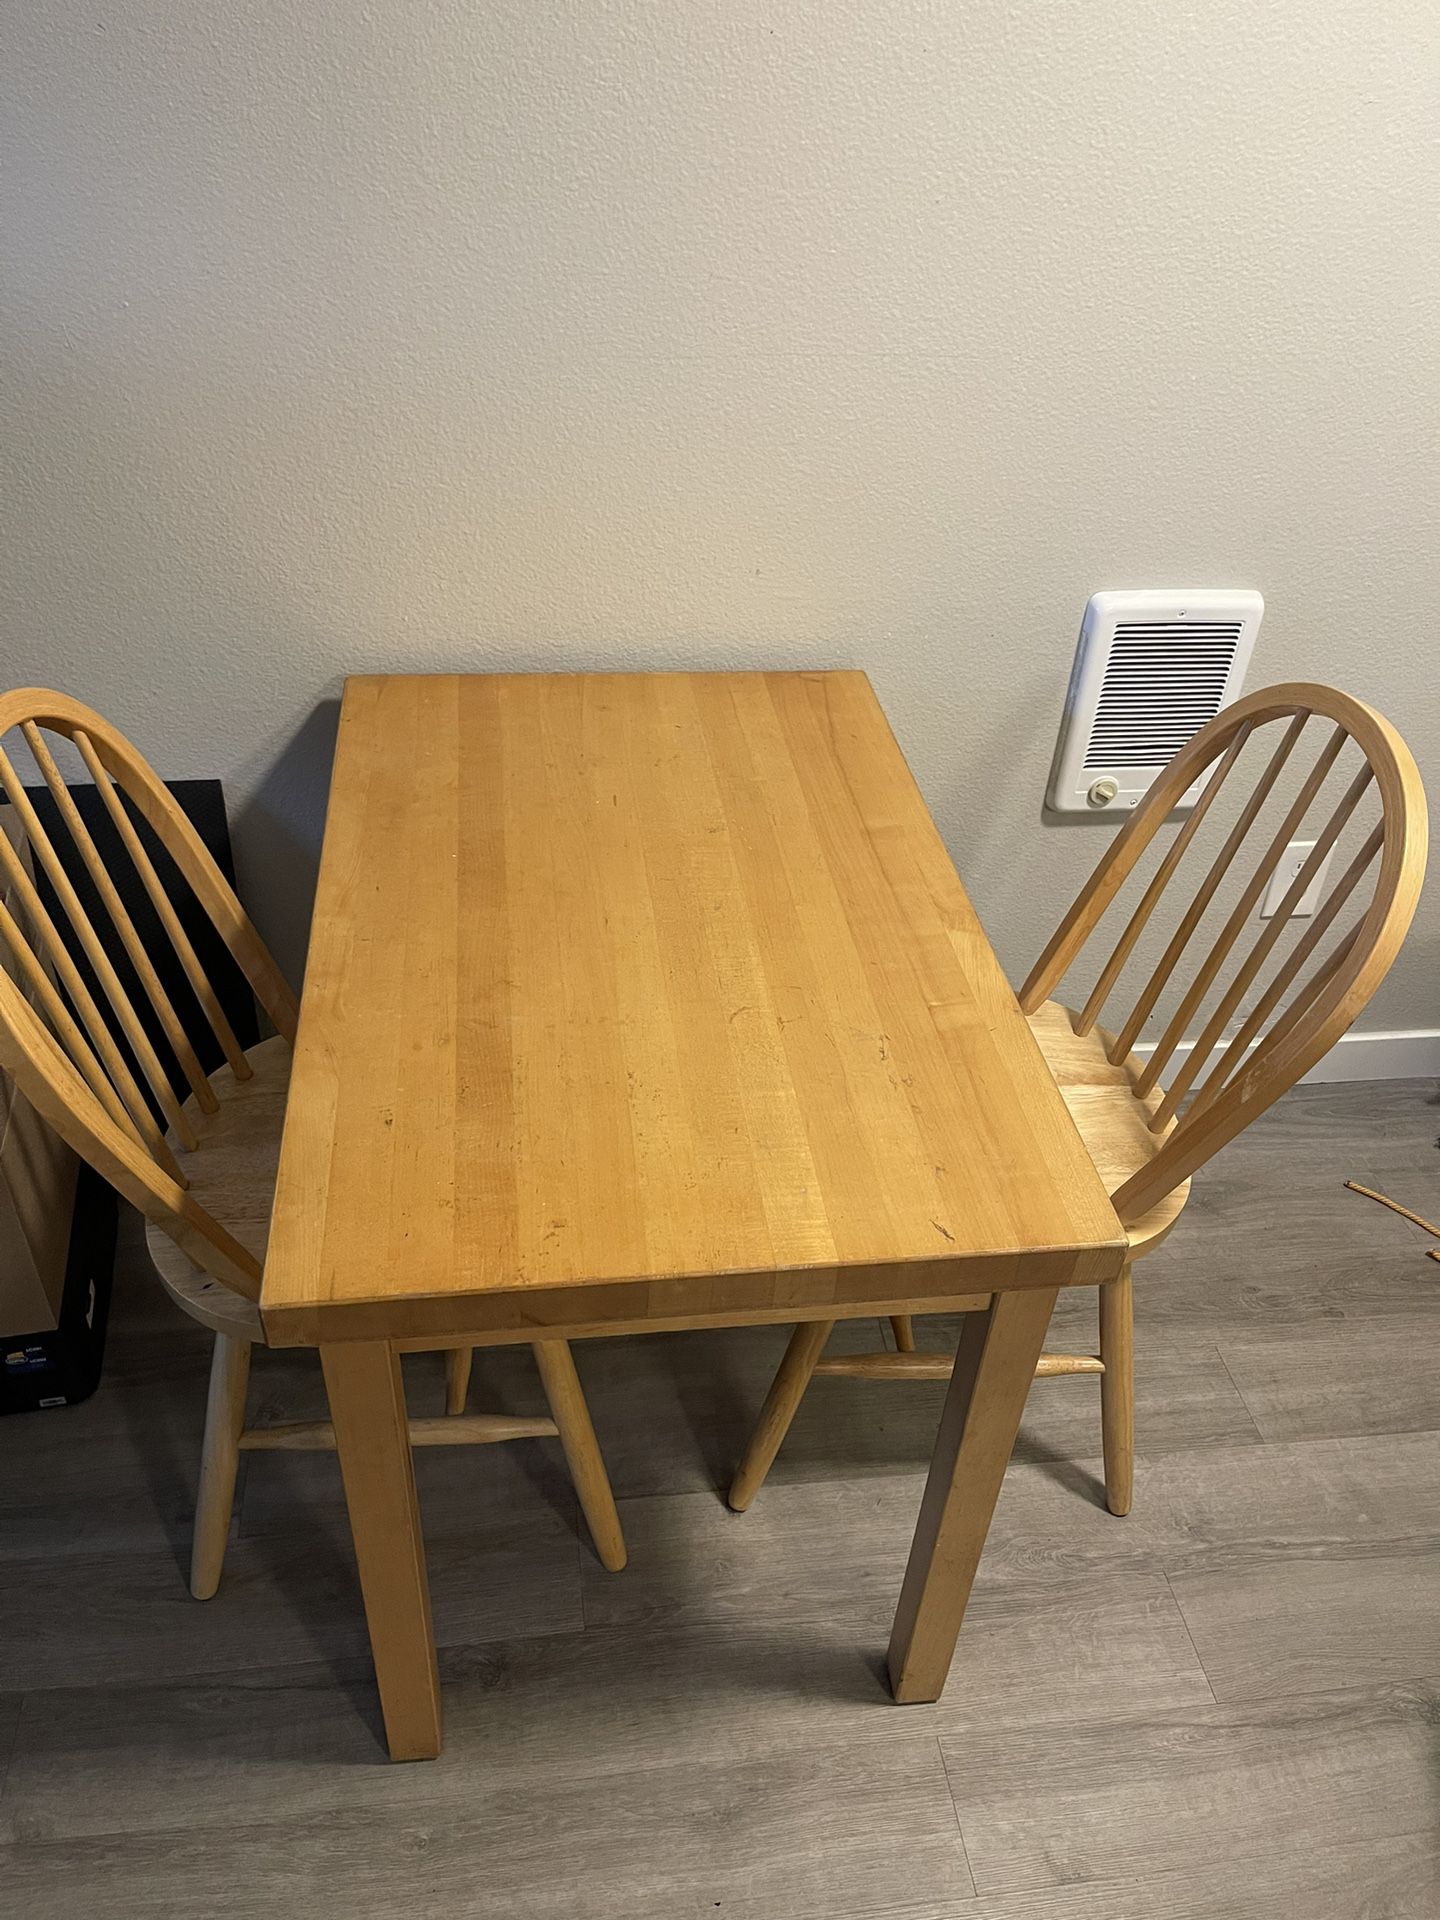 Solid Oak Wood Table And Chairs